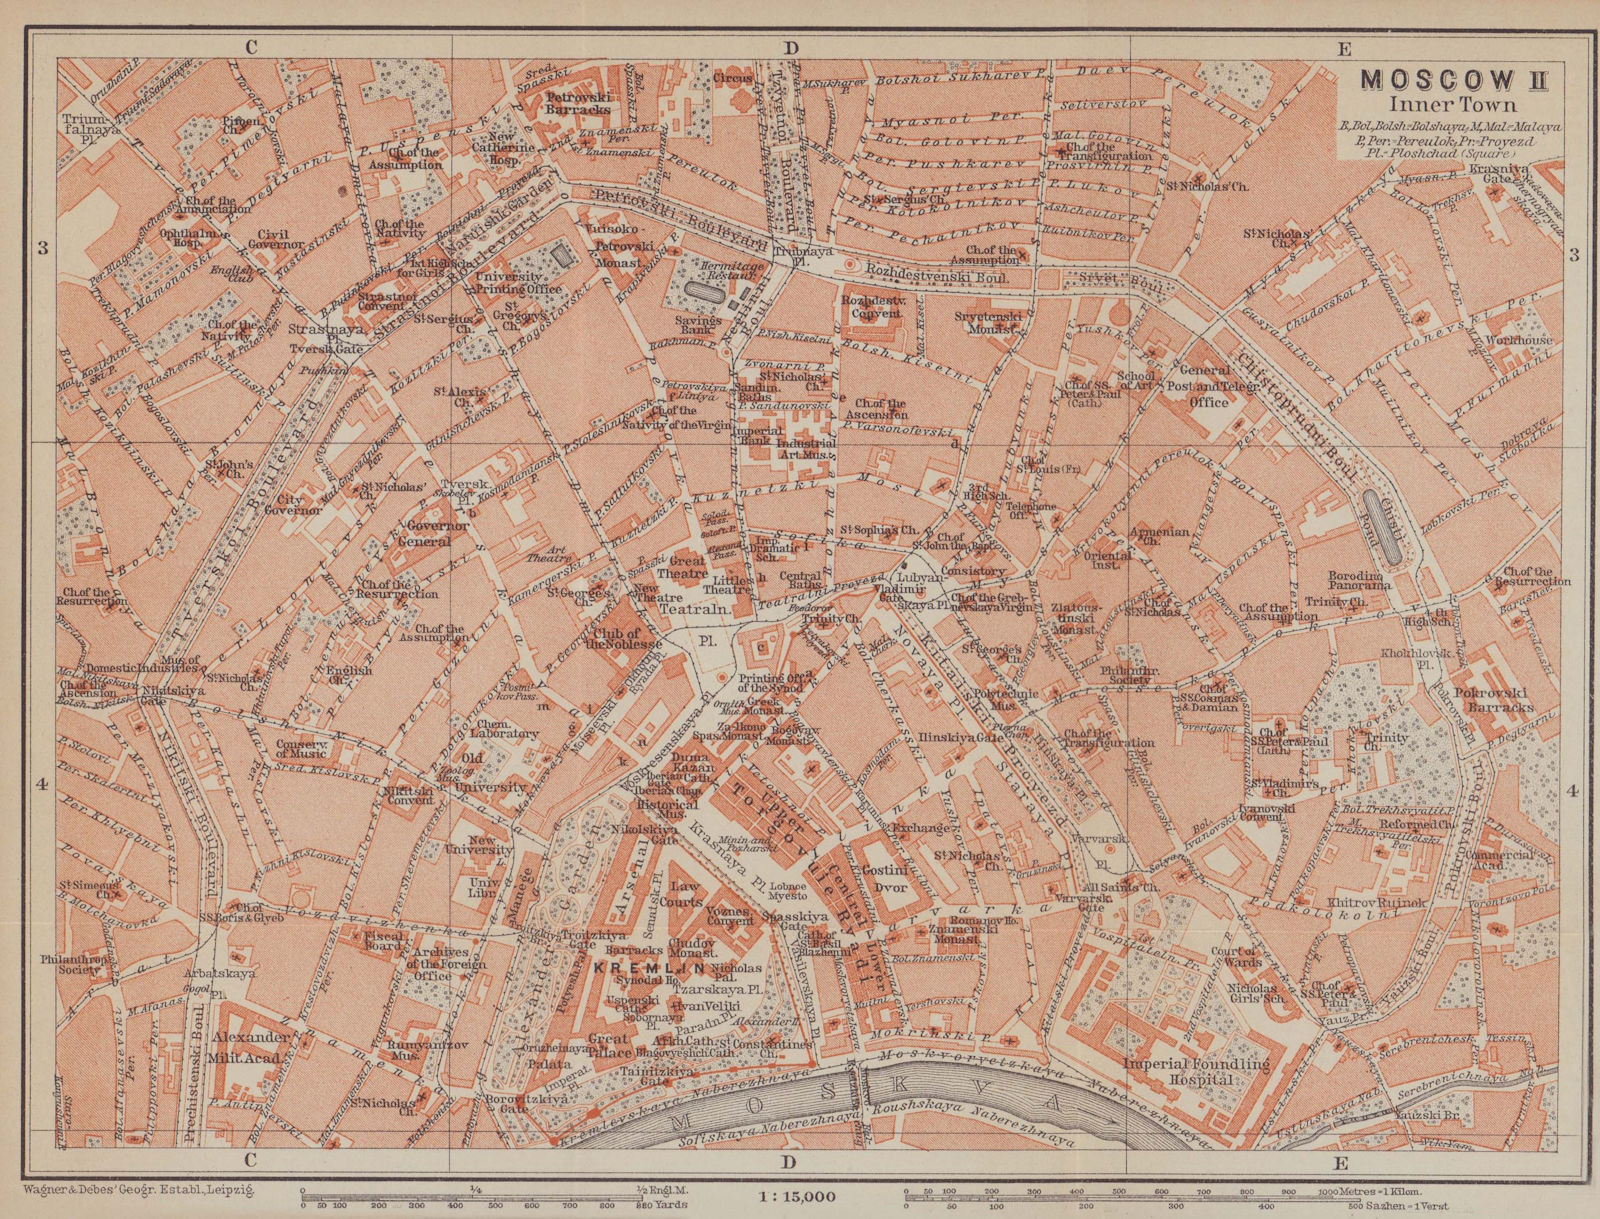 Associate Product Moscow II city town centre plan. Russia. BAEDEKER 1914 old antique map chart